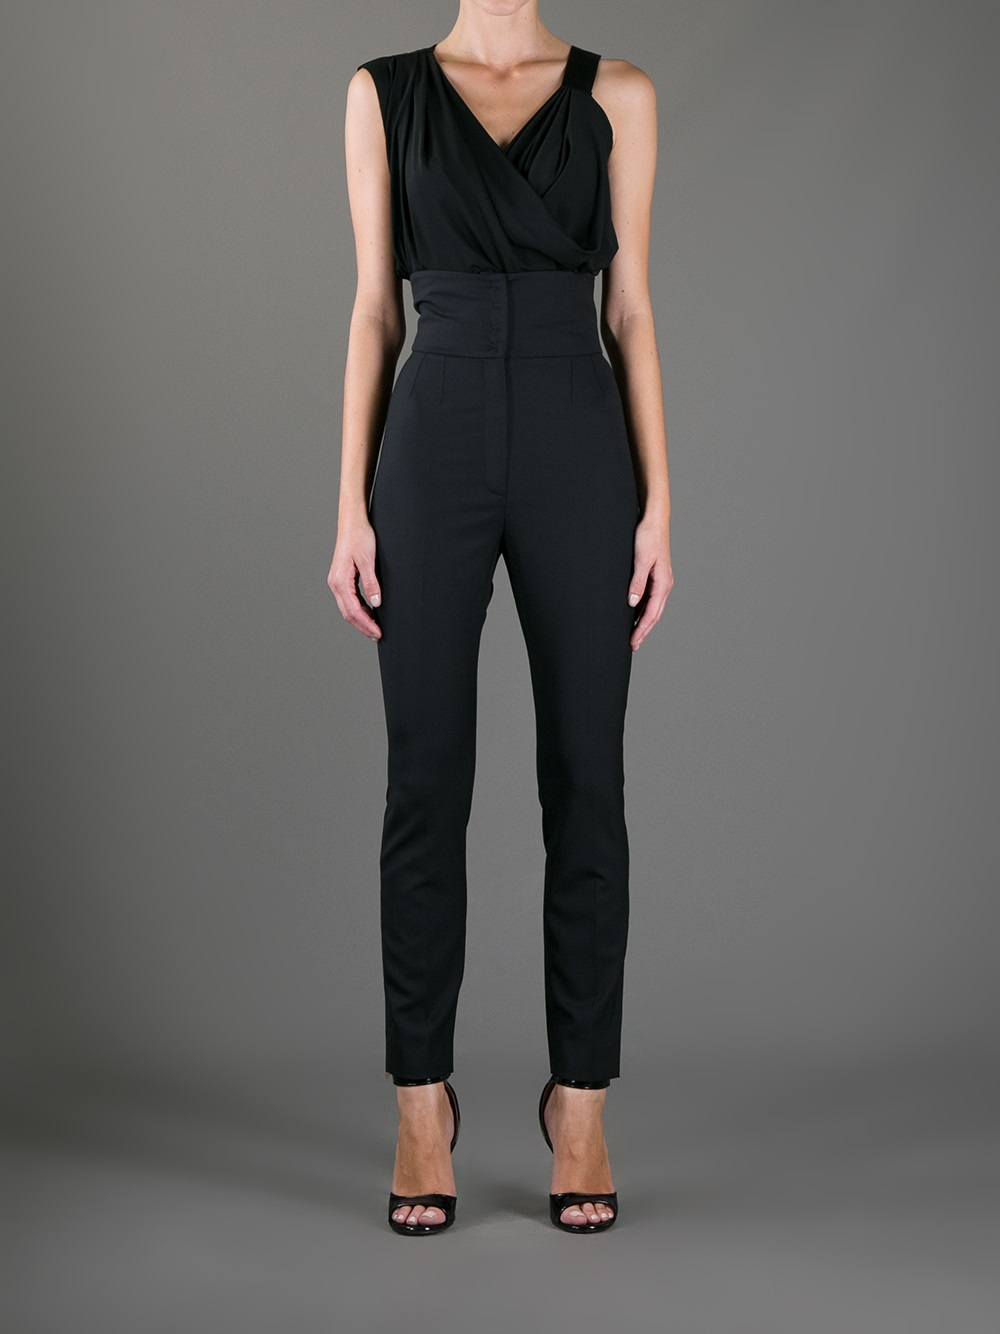 Dolce & Gabbana High Waisted Trousers in Black | Lyst